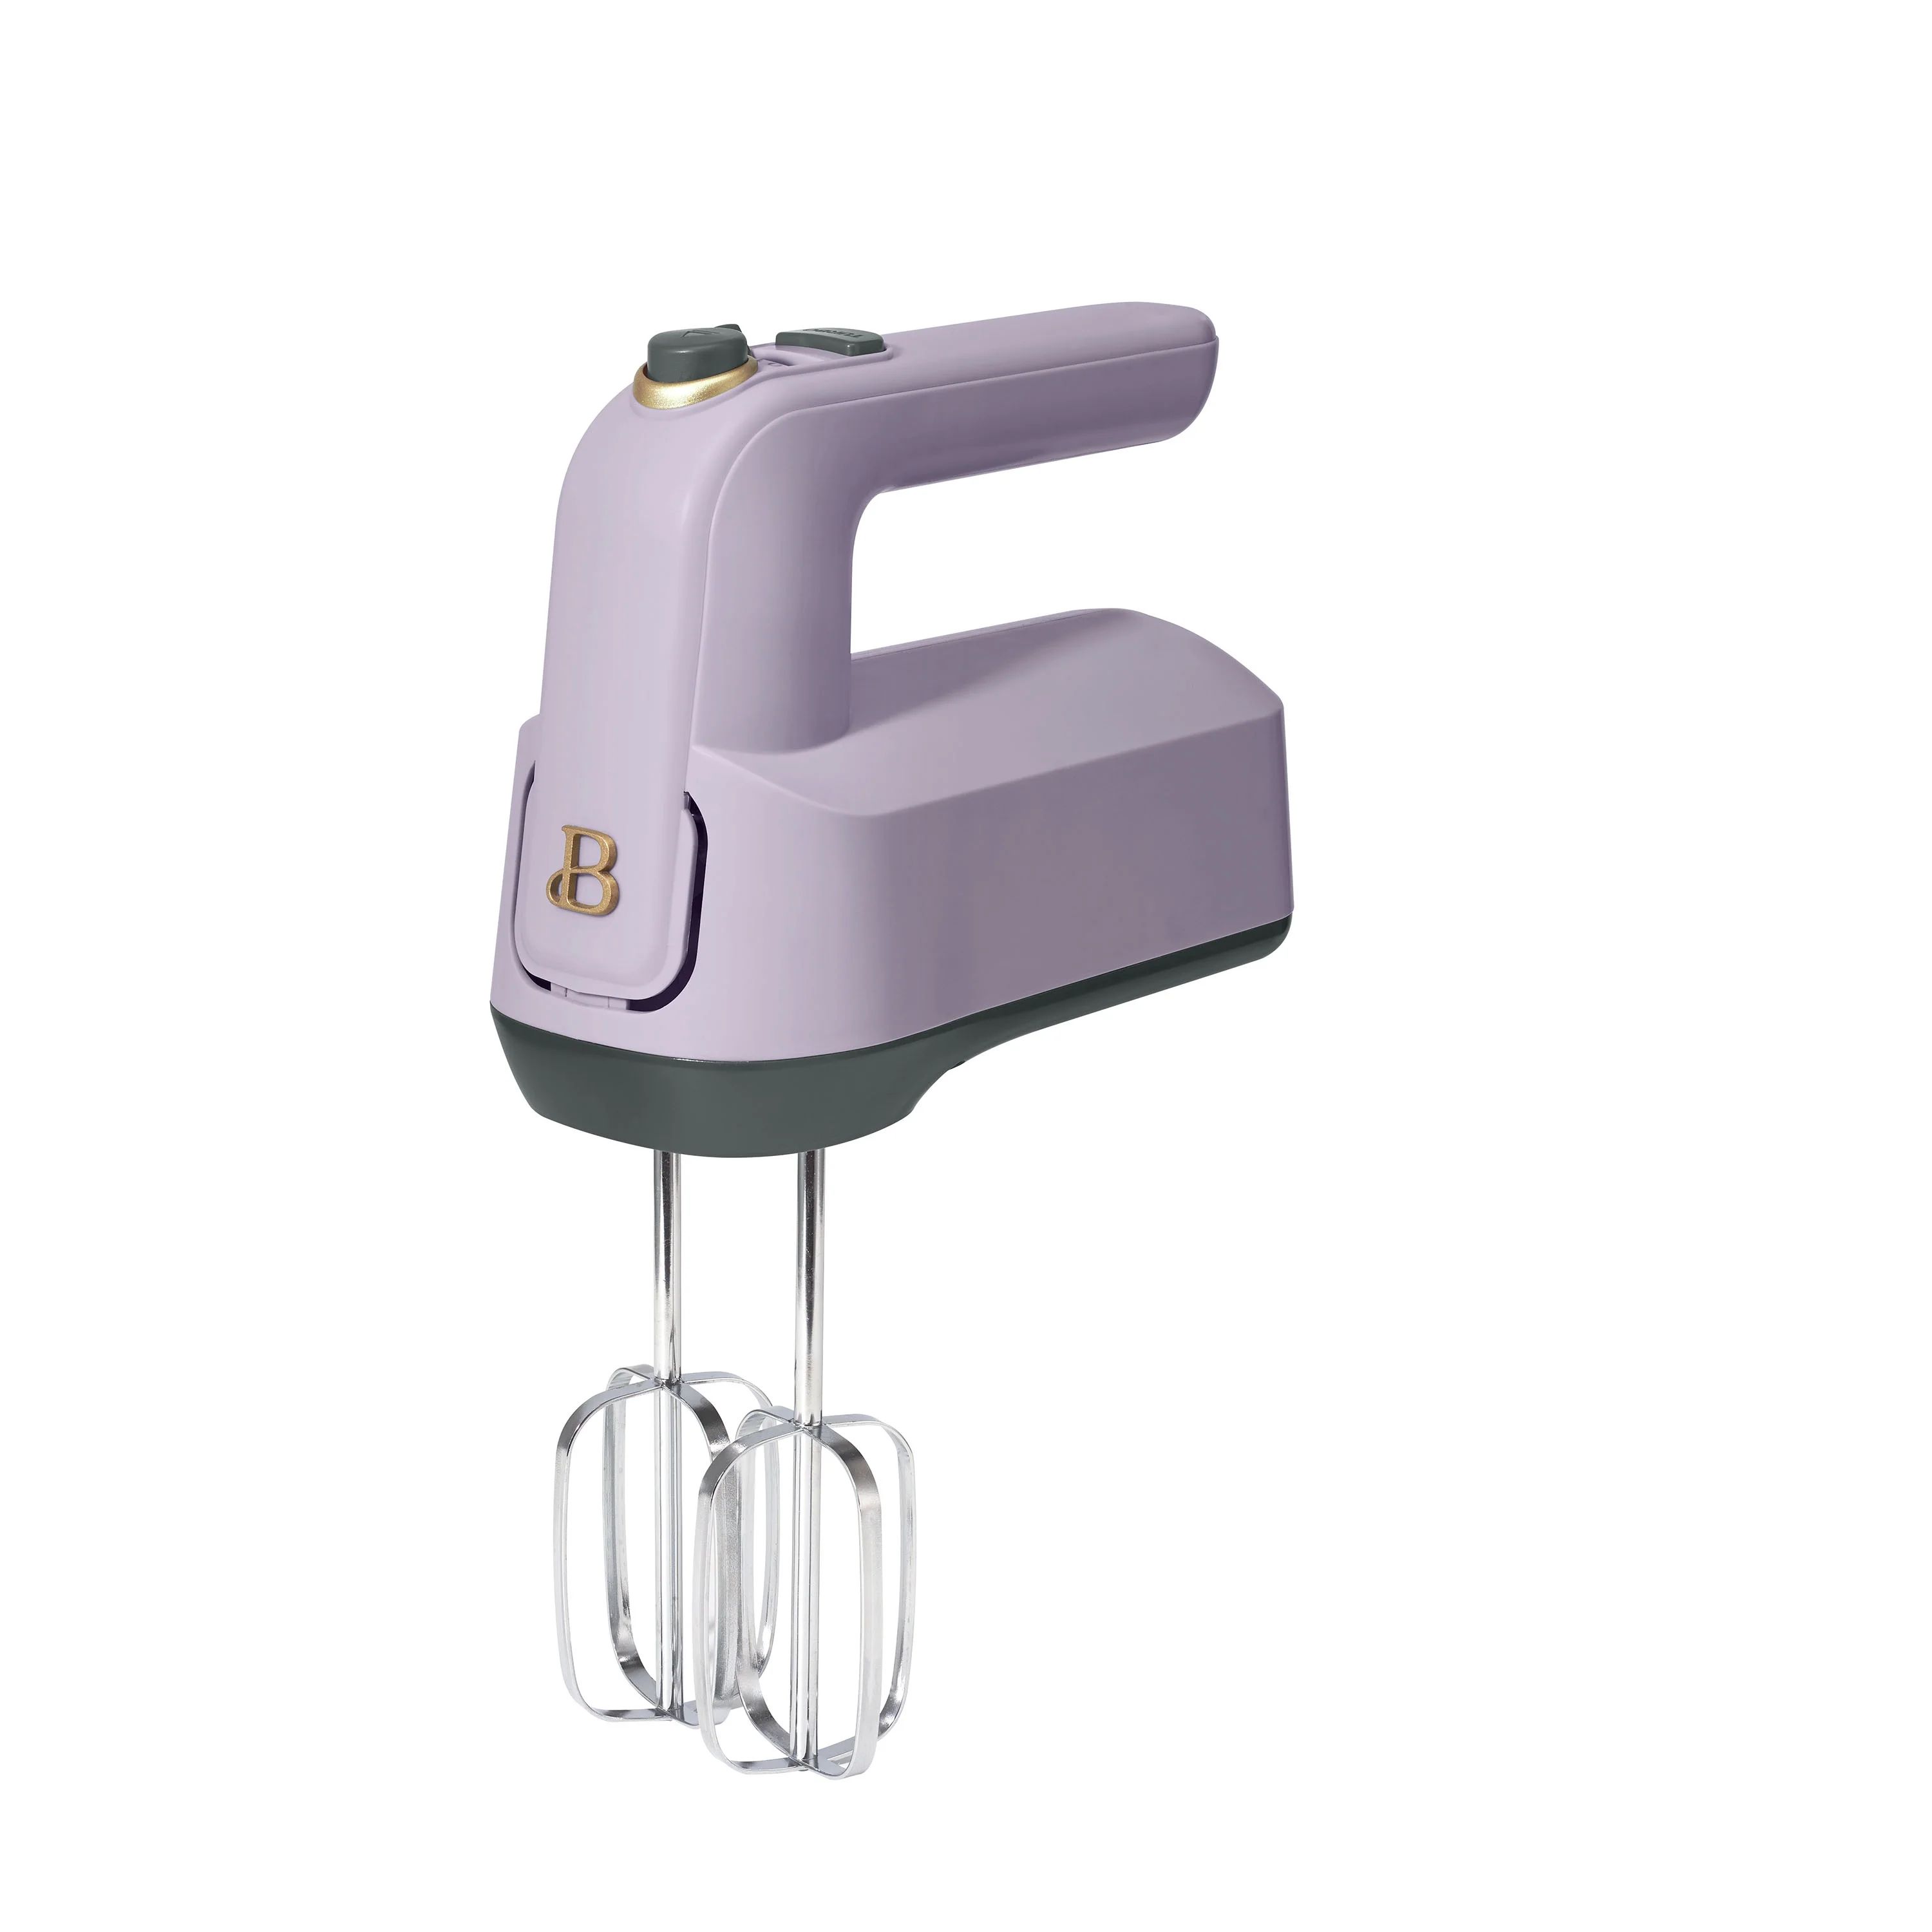 Beautiful 6-Speed Electric Hand Mixer, Lavender by Drew Barrymore | Walmart (US)